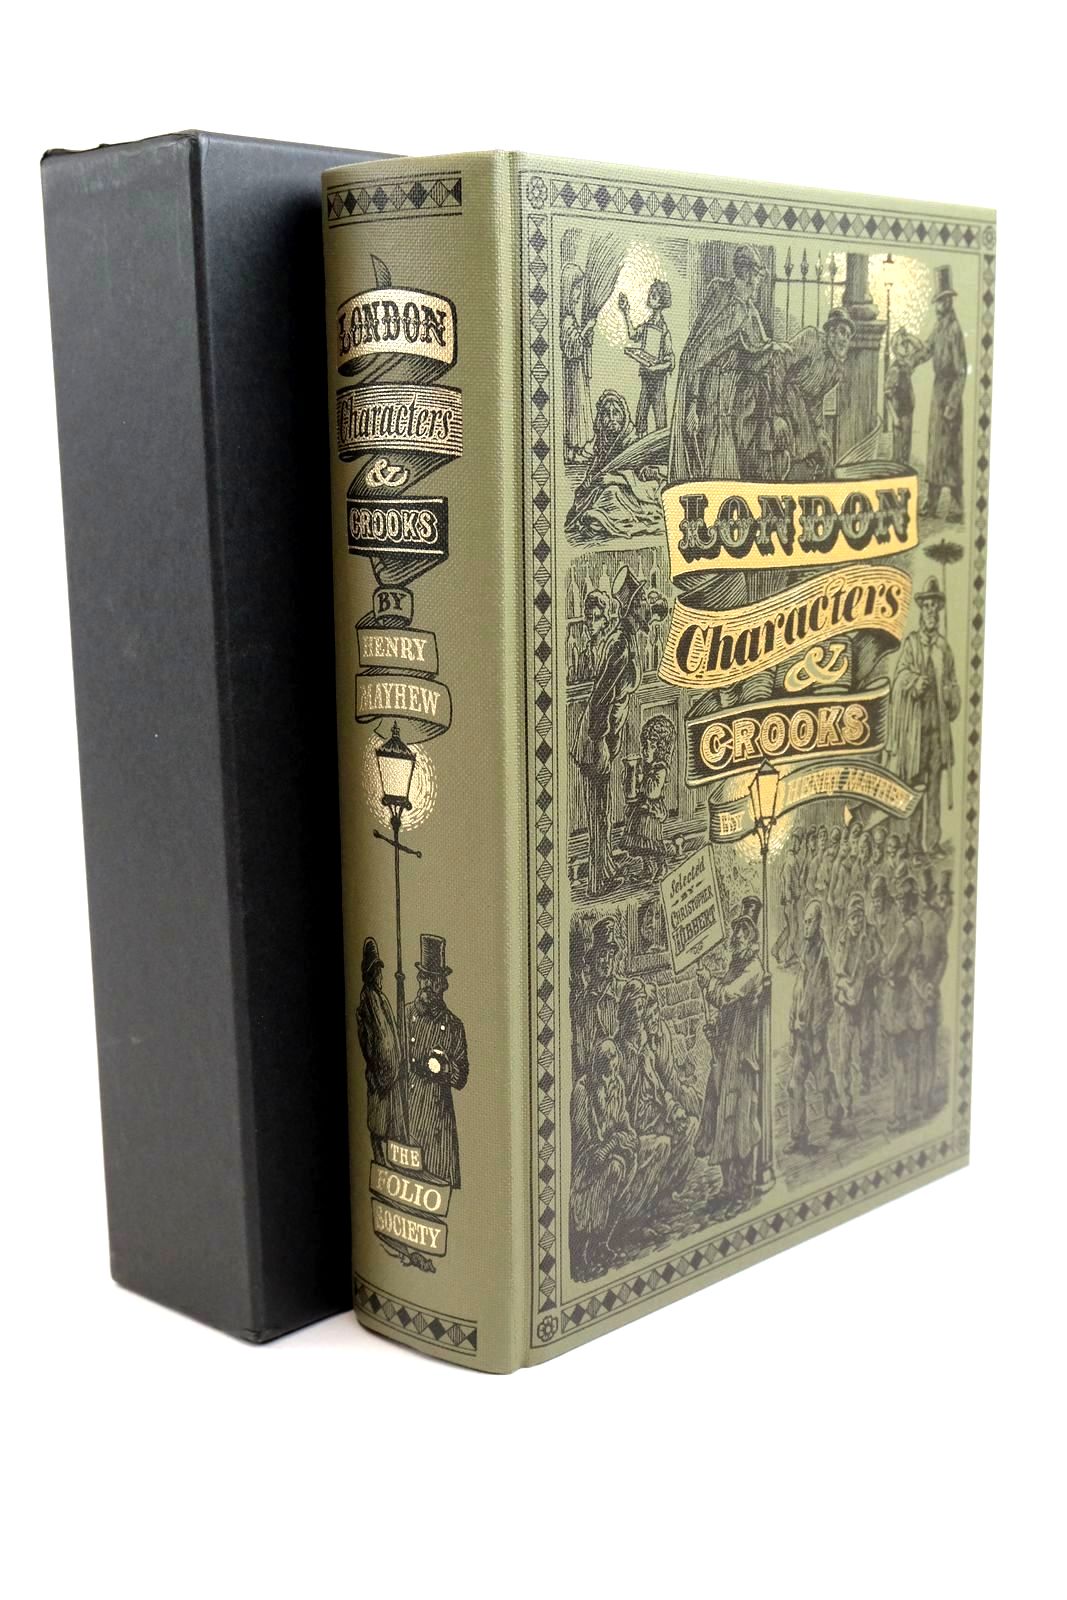 Photo of LONDON CHARACTERS AND CROOKS written by Mayhew, Henry Hibbert, Christopher published by Folio Society (STOCK CODE: 1321340)  for sale by Stella & Rose's Books